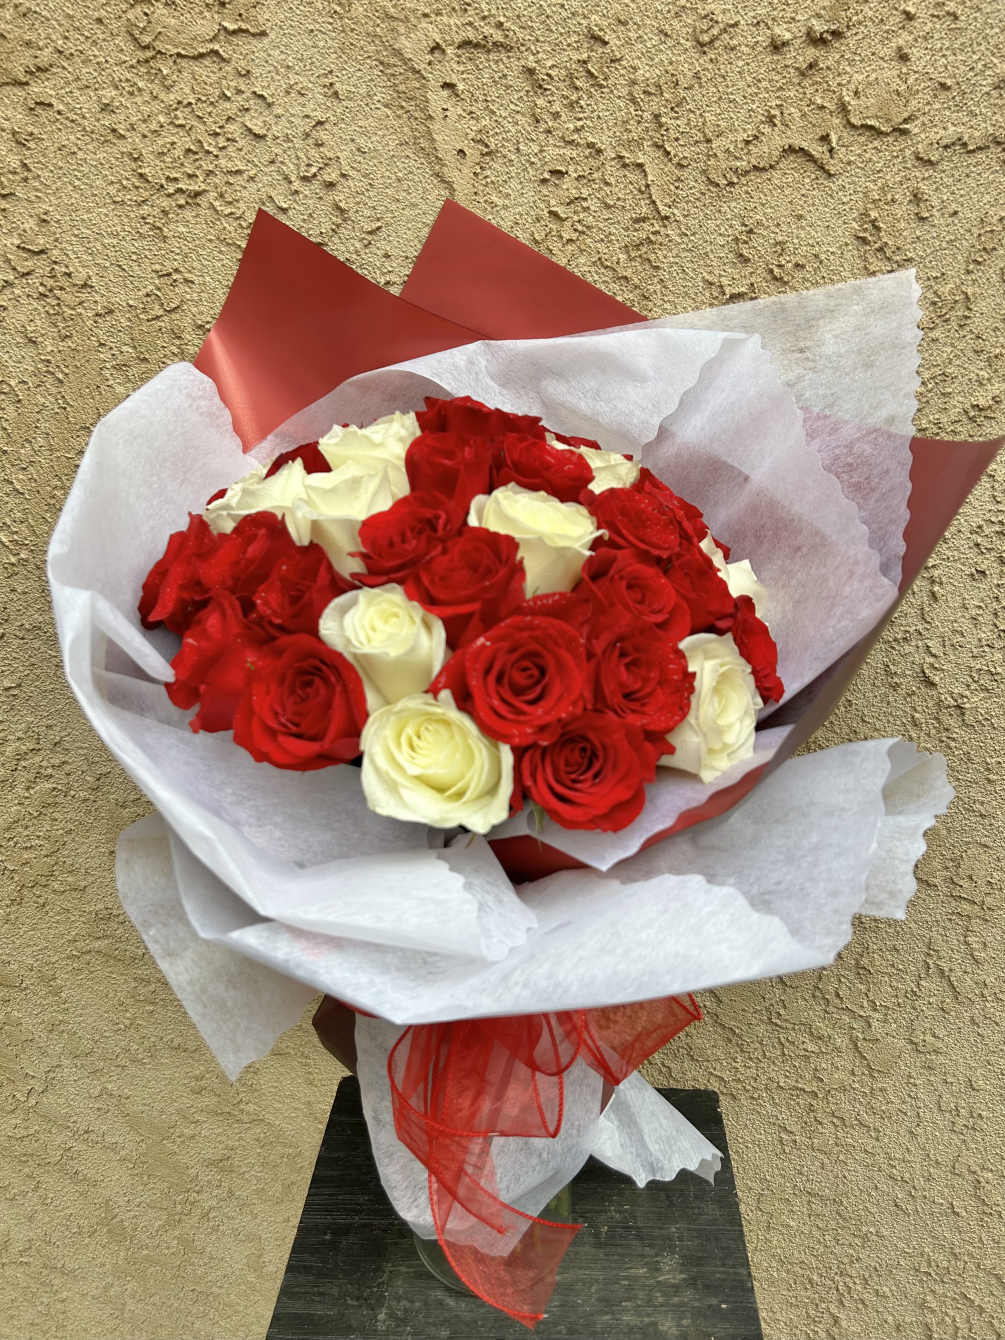 Beautiful arrangement featuring red and white roses. 